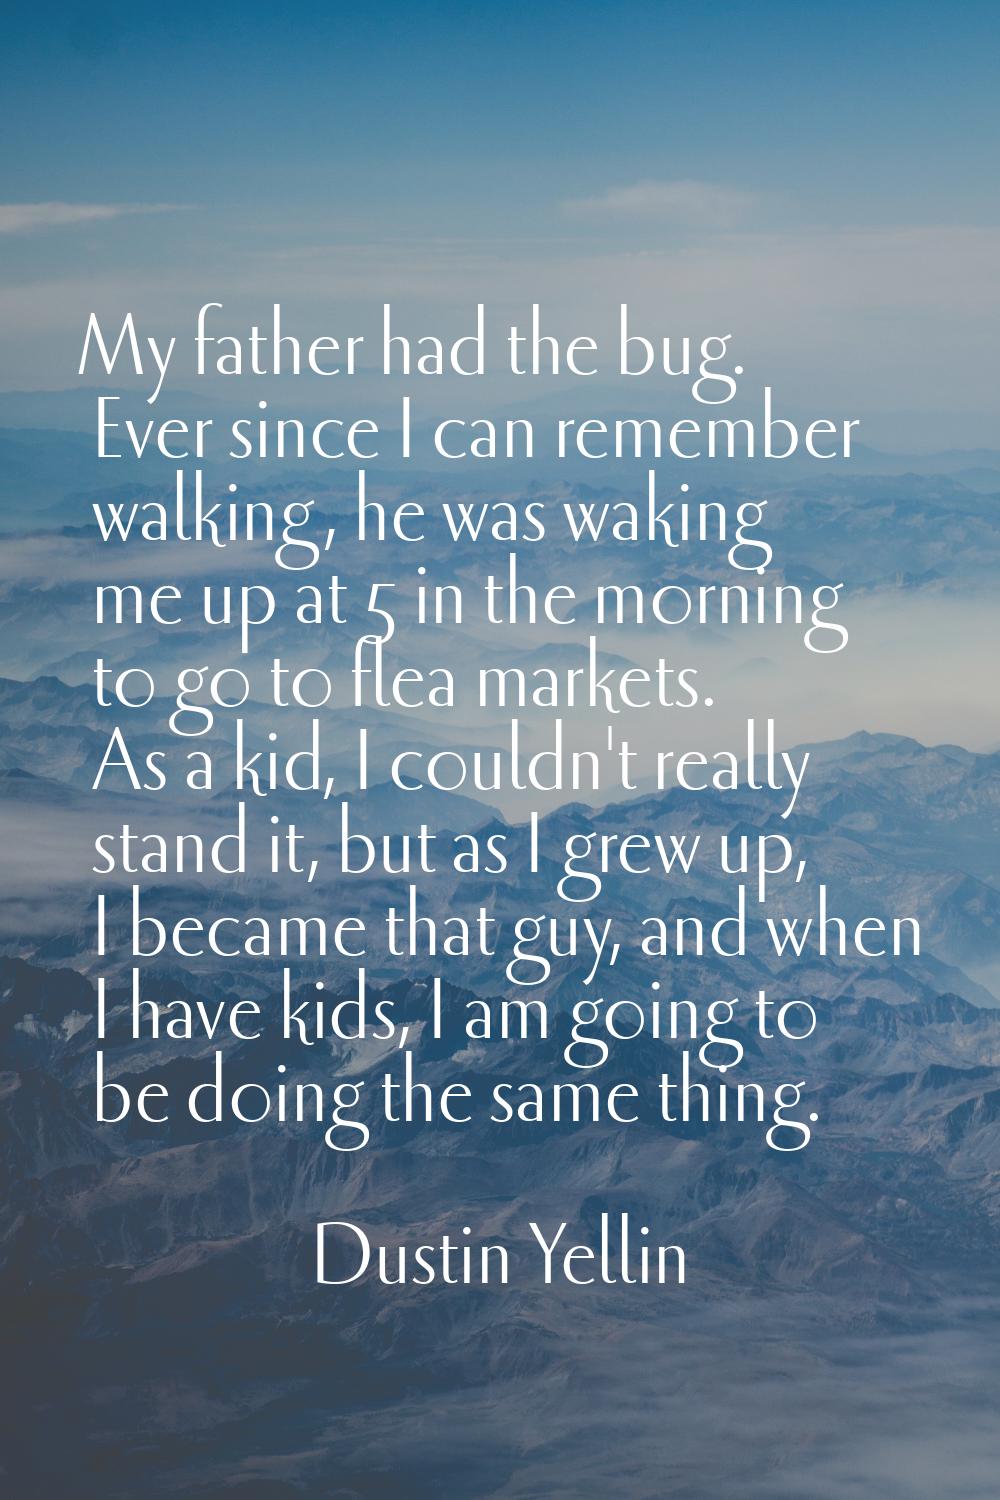 My father had the bug. Ever since I can remember walking, he was waking me up at 5 in the morning t